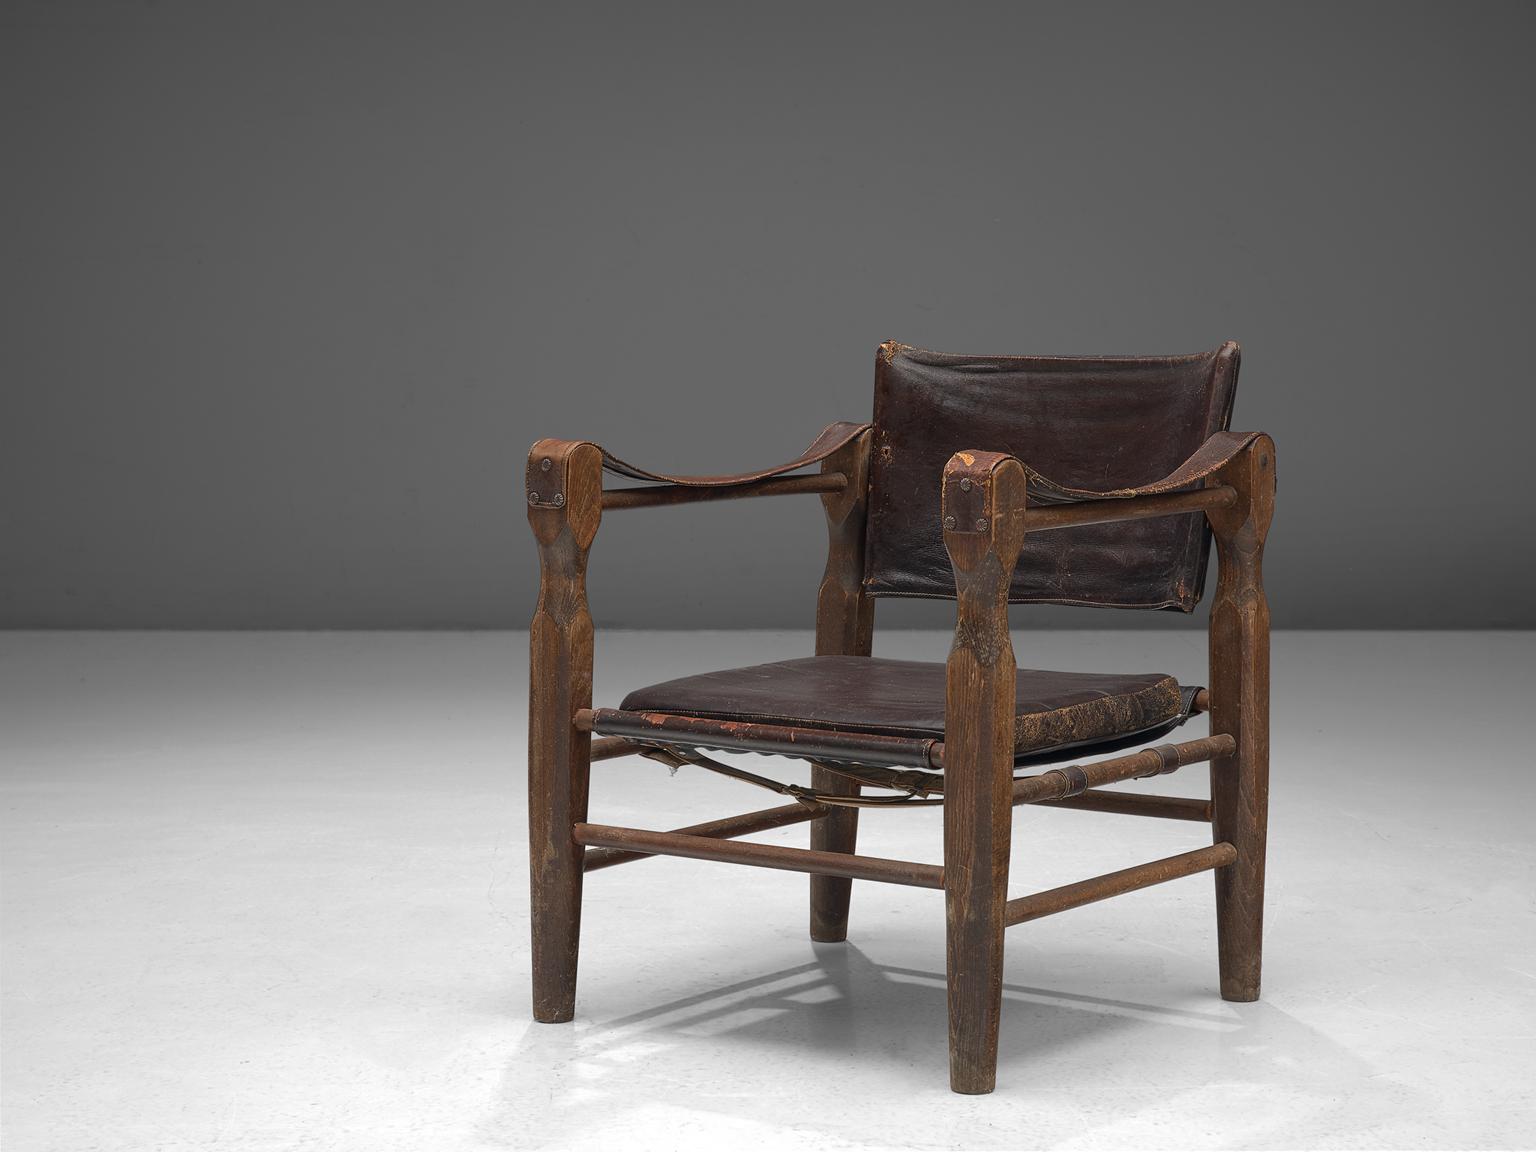 Safari chair, oak and leather, Europe, 1940s.

Robust yet stately safari chair that gained a very rich patina. This armchair features wonderfully carved wooden legs that raise up and hold up the leather straps that function as armrests. These